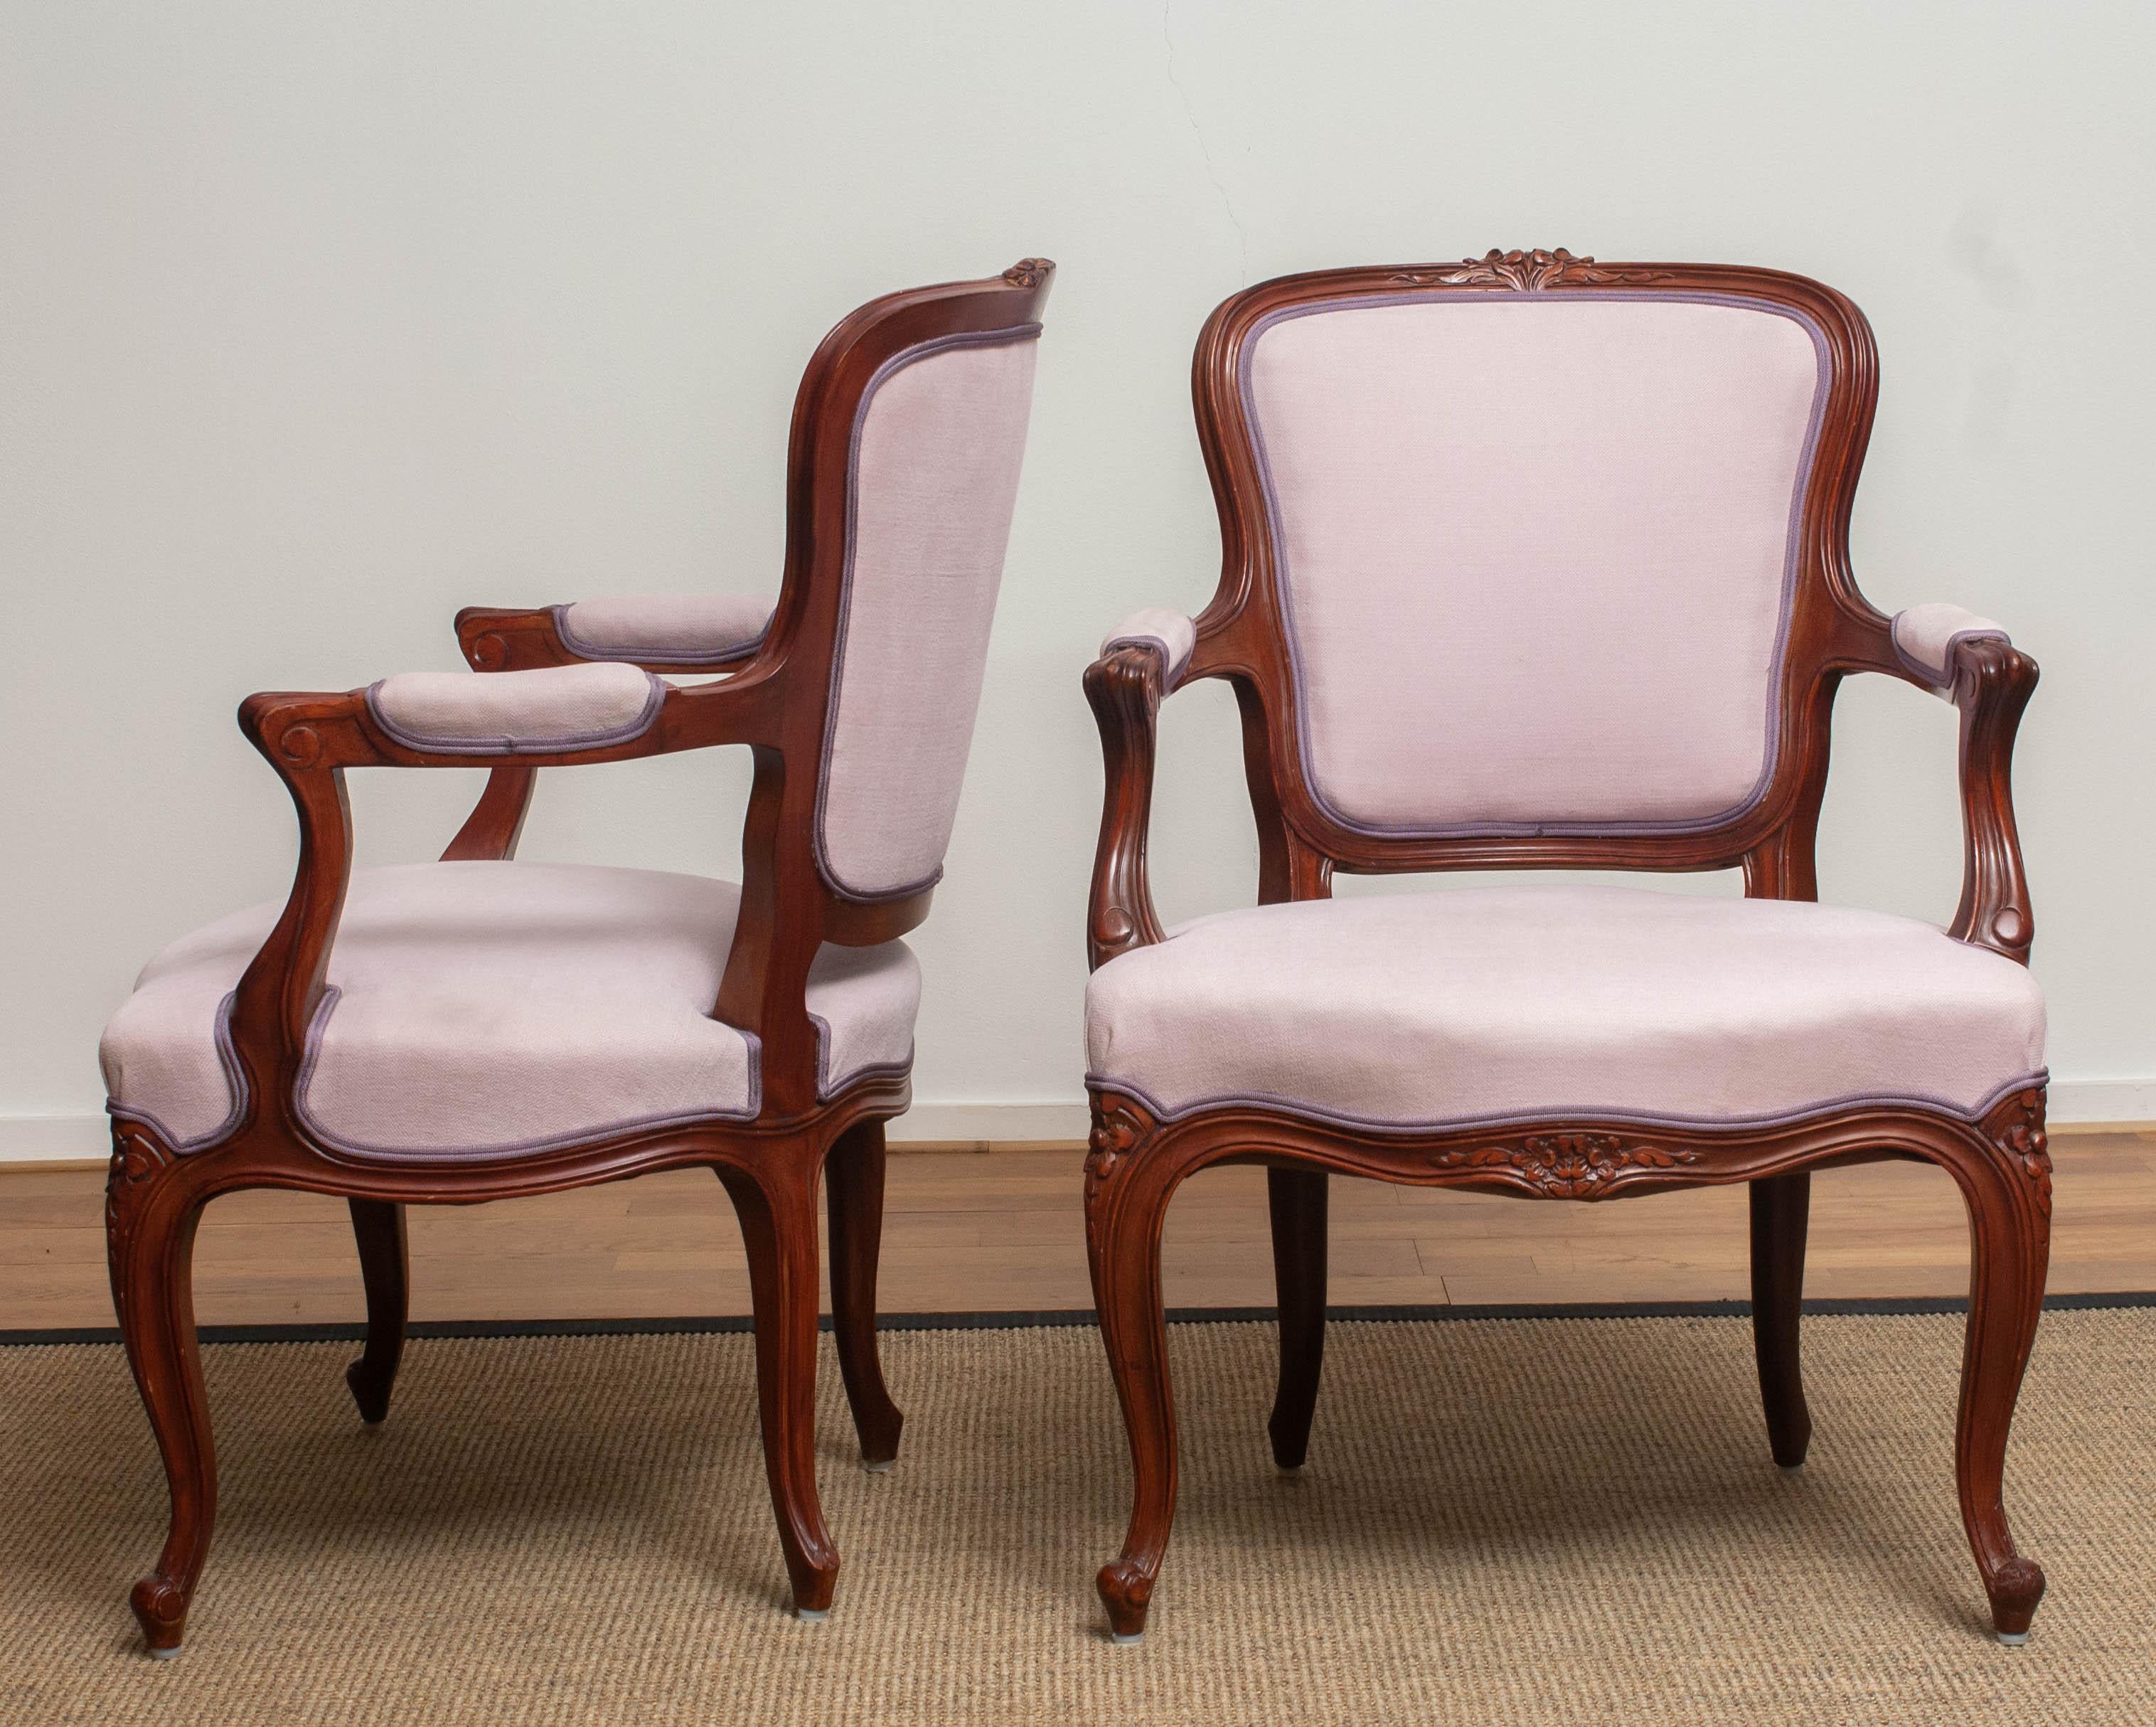 1950s Pair of Pink Swedish Rococo Bergères in the Shabby Chic Technique Chairs F 8